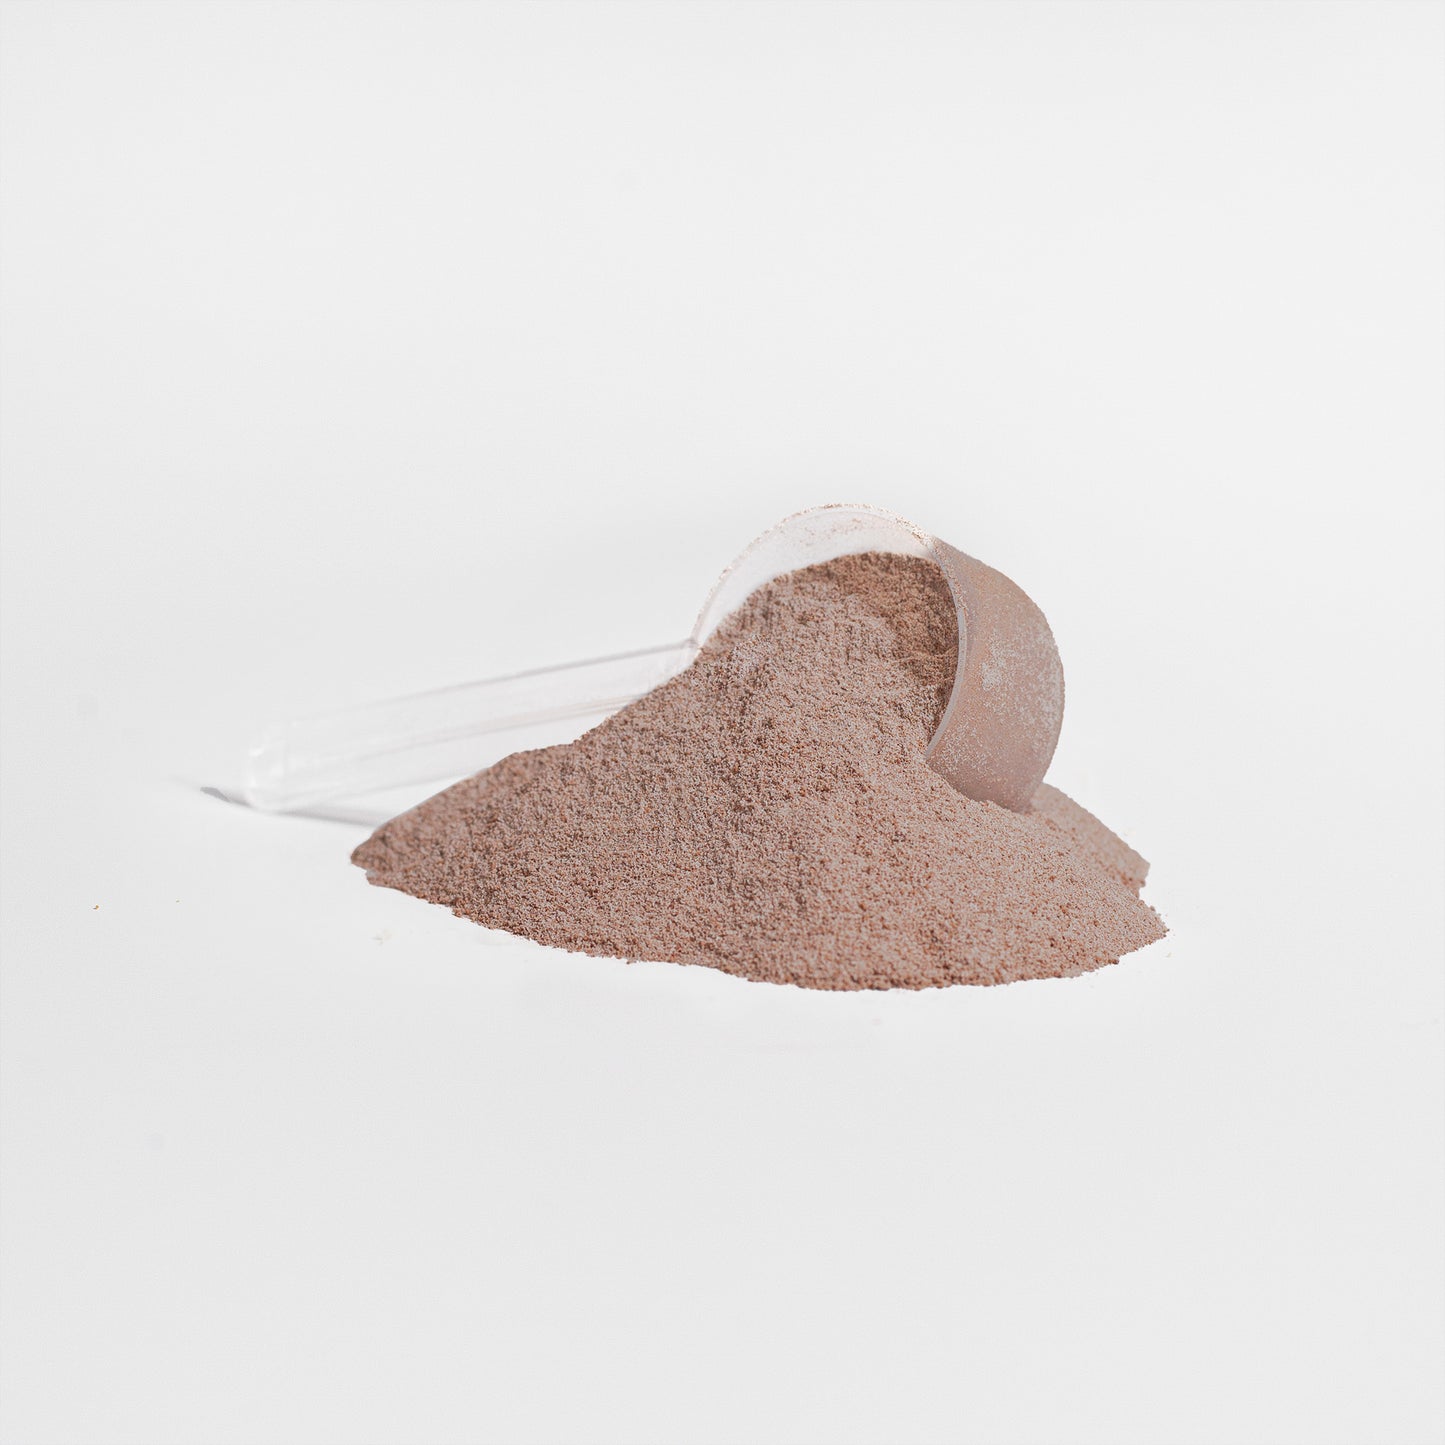 Whey Protein - Chocolate Flavour